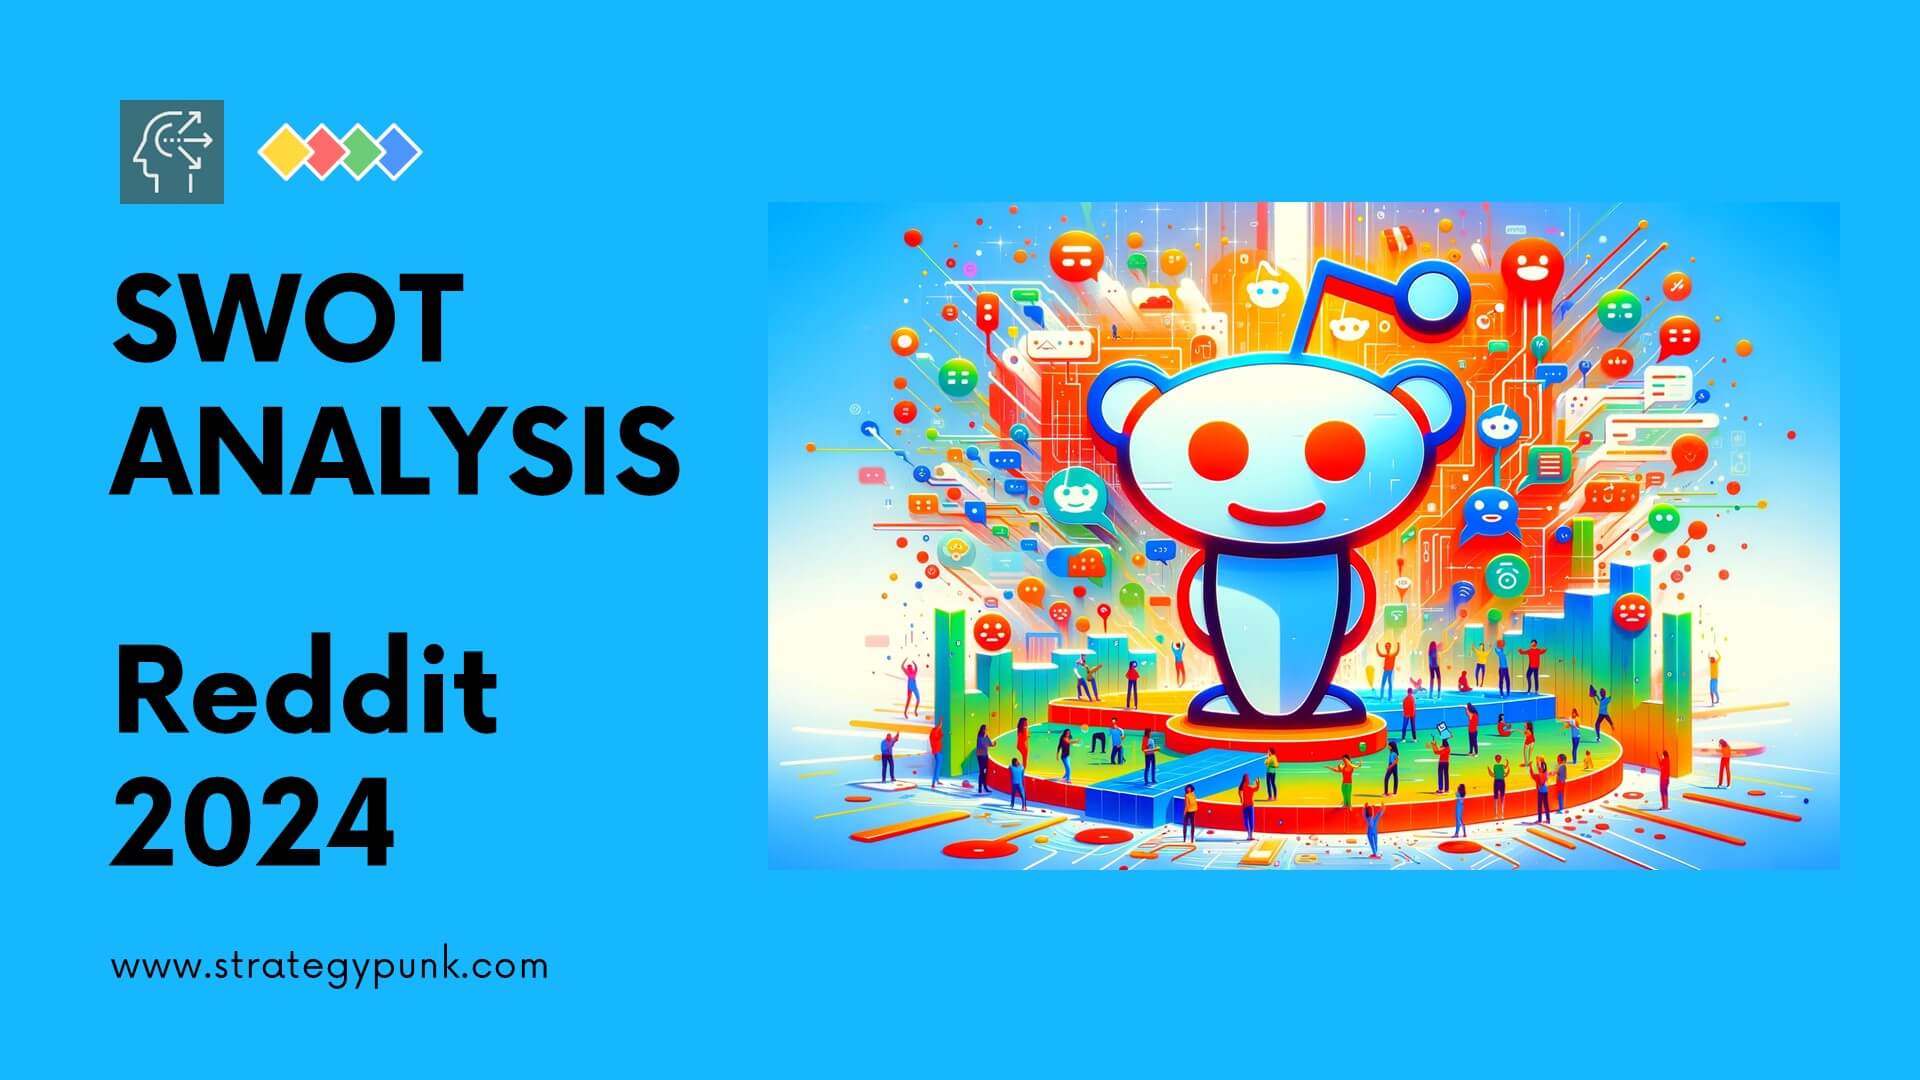 Winning with SWOT: Reddit’s Strategy Playbook (Plus Free PPT)